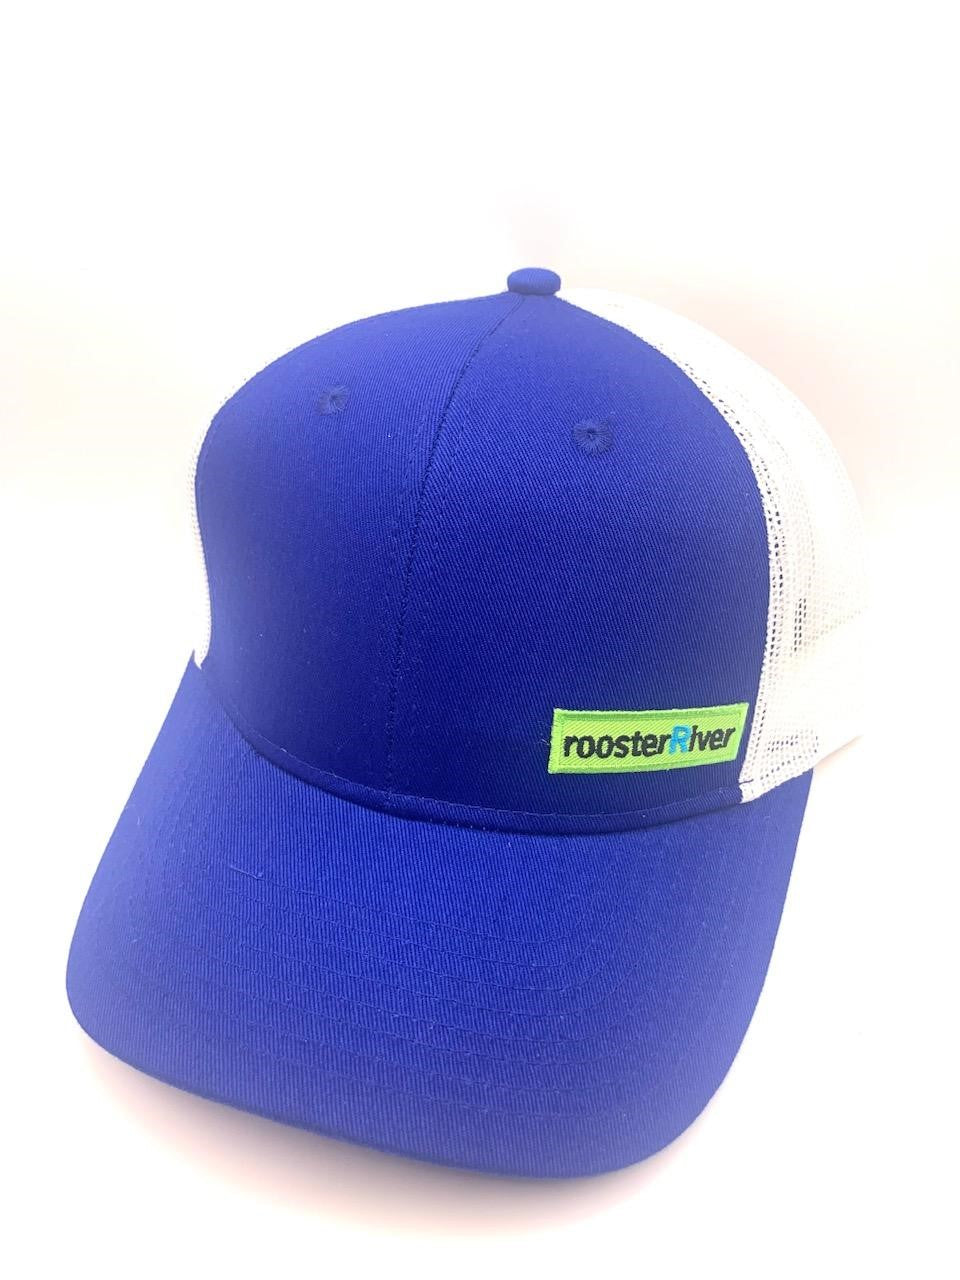 Click here to view the line of Logo Moderate Trucker hats